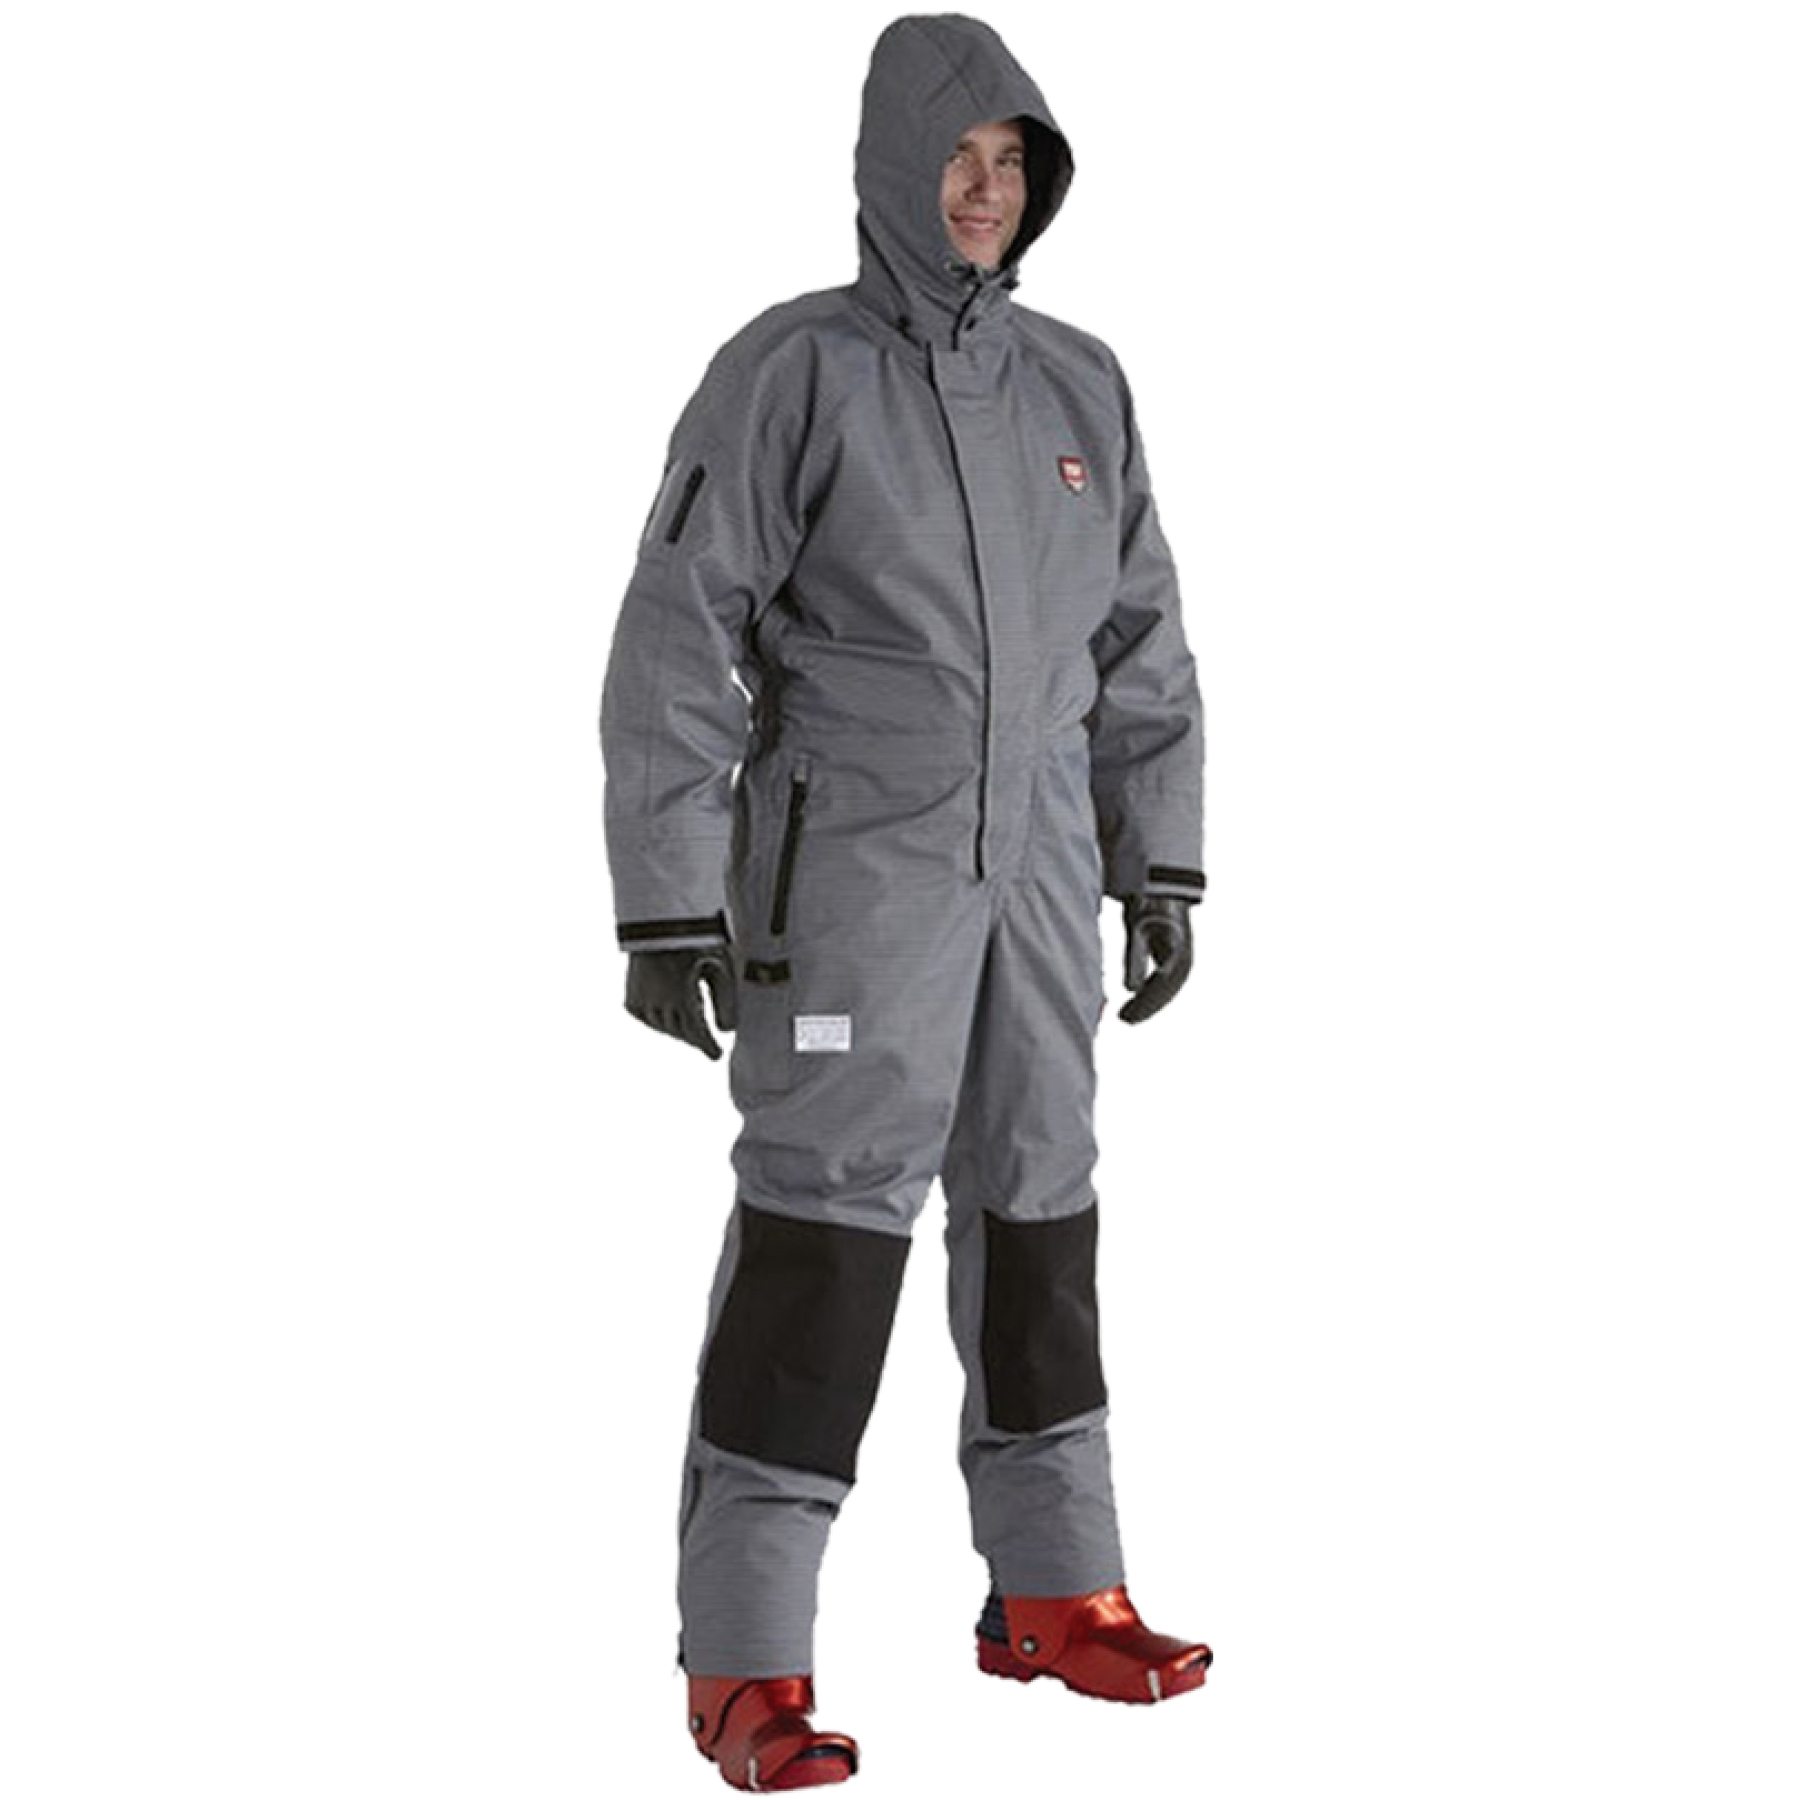 Safety Coveralls